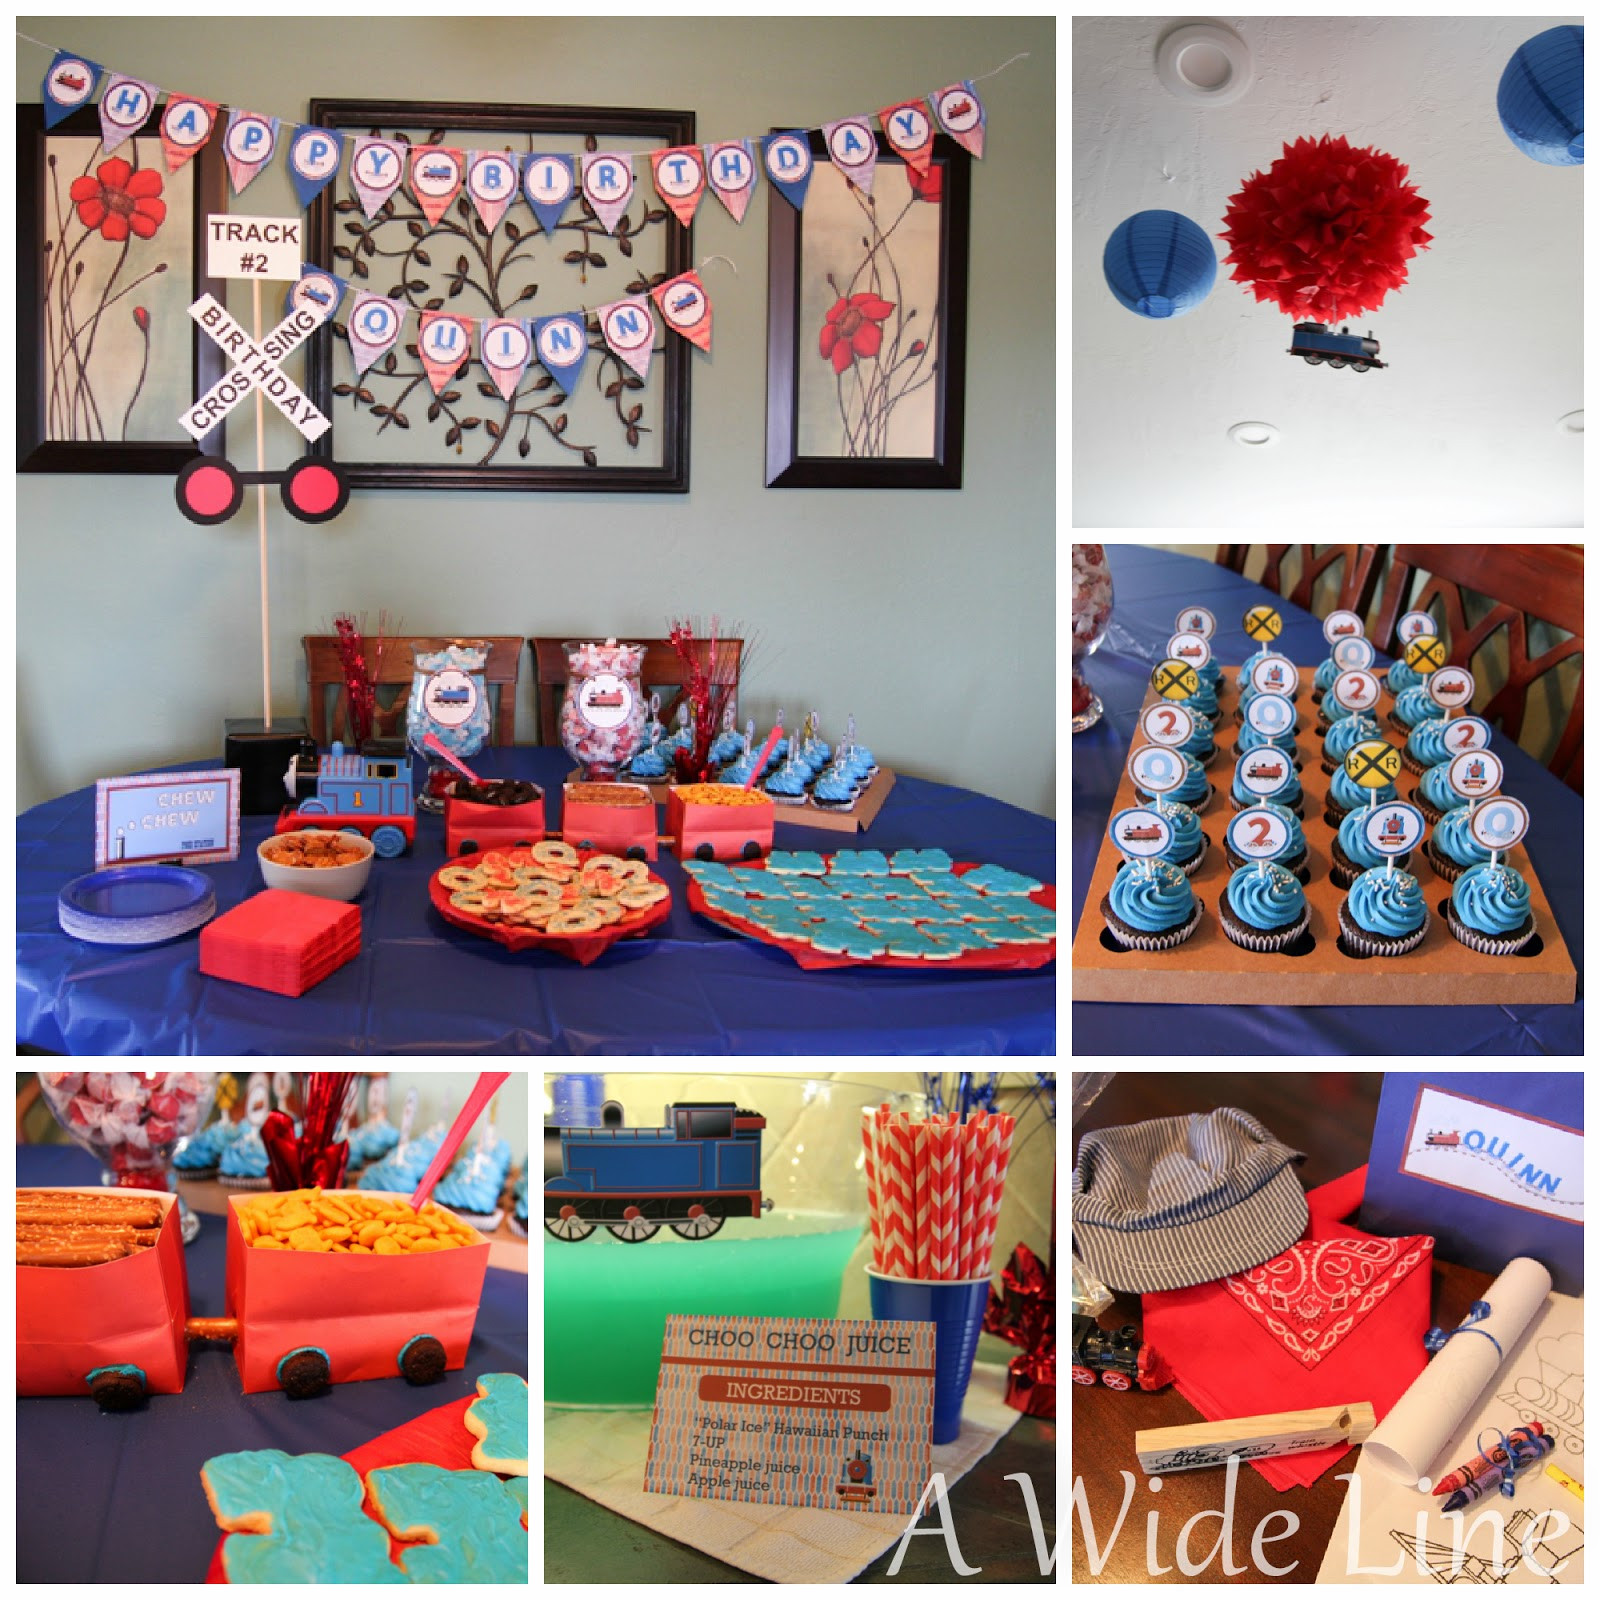 Train Birthday Party Decorations
 A Wide Line DIY train themed birthday party